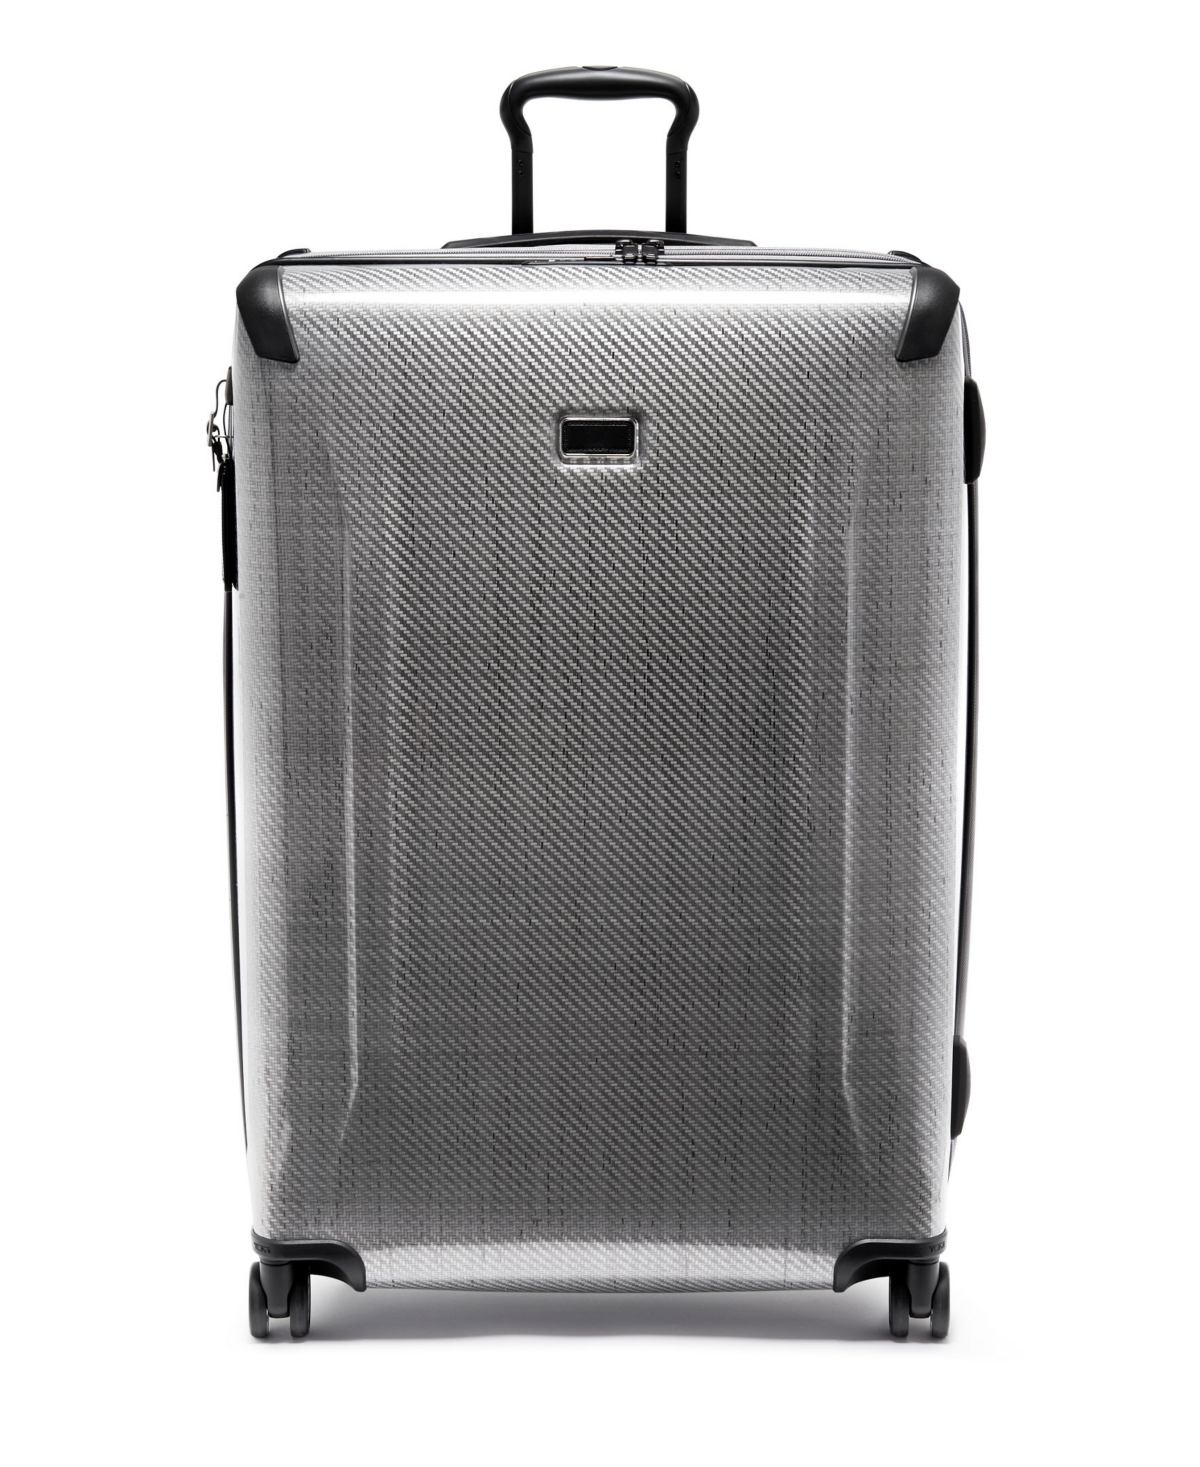 TUMI TEGRA LITE 31" EXTENDED TRIP EXPANDABLE PACKING SUITCASE